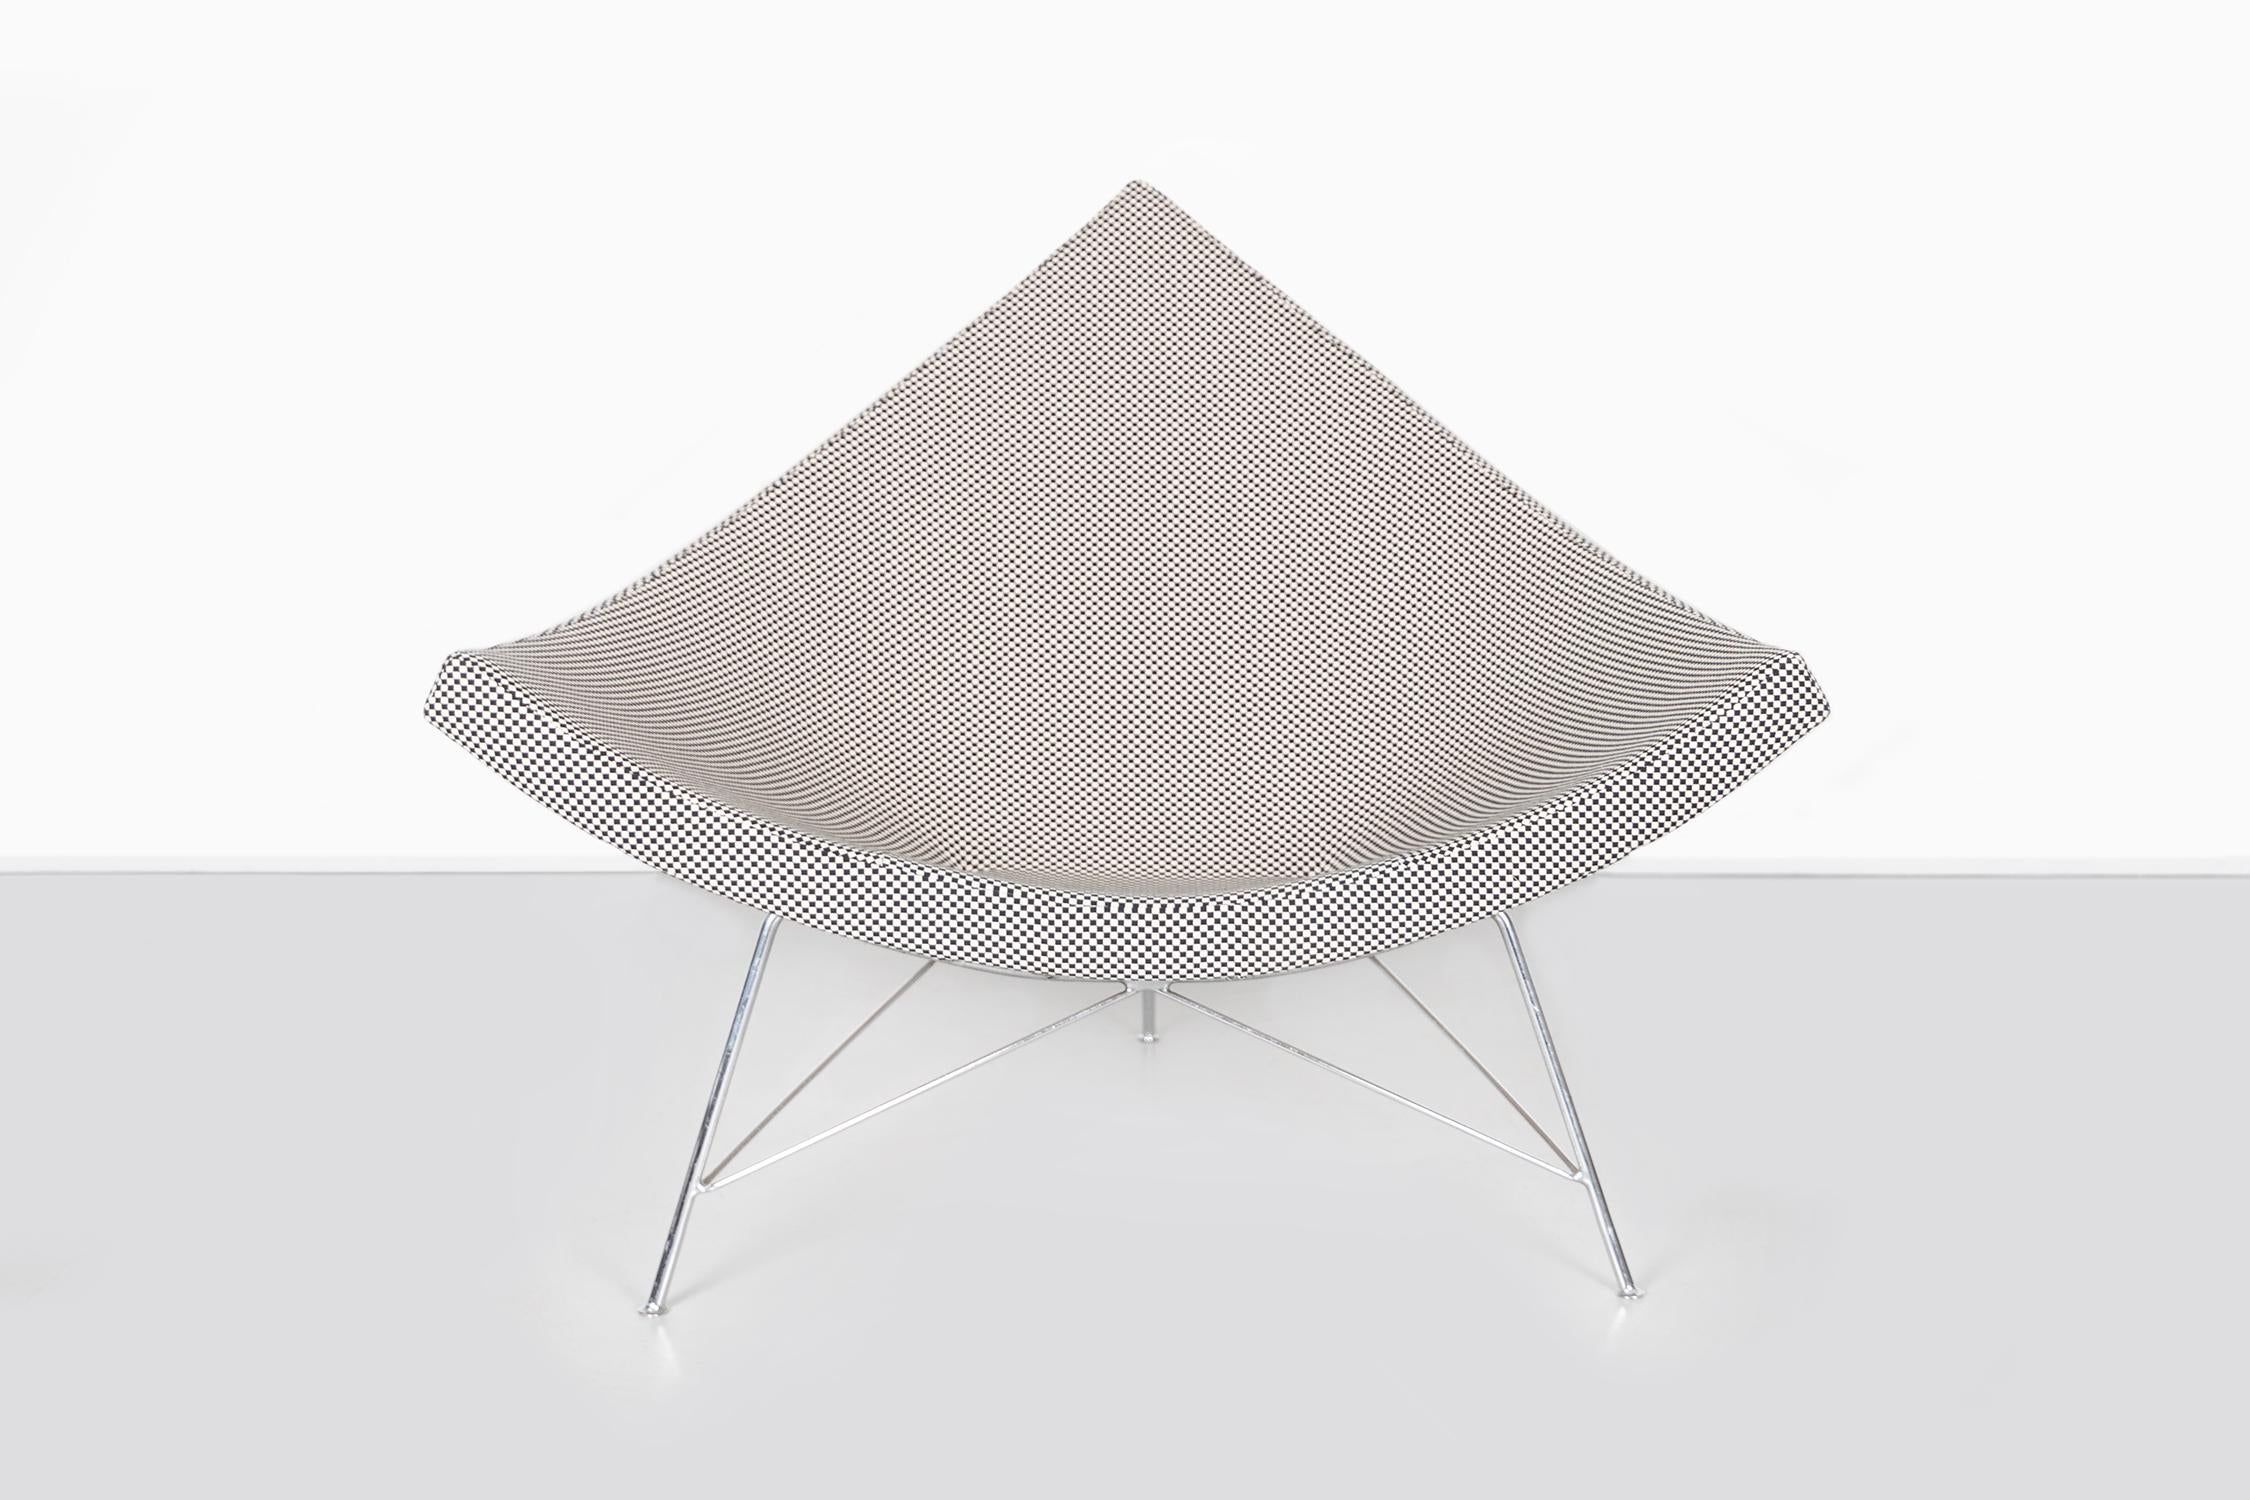 Coconut chair

Designed by George Nelson for Herman Miller

USA, circa 1950s

1950s Alexander Girard “Minicheck” fabric, fiberglass, and aluminum

Measures: 33” H x 41 ½ W x 34” D x seat 13 ¾” H

This first edition chair has been